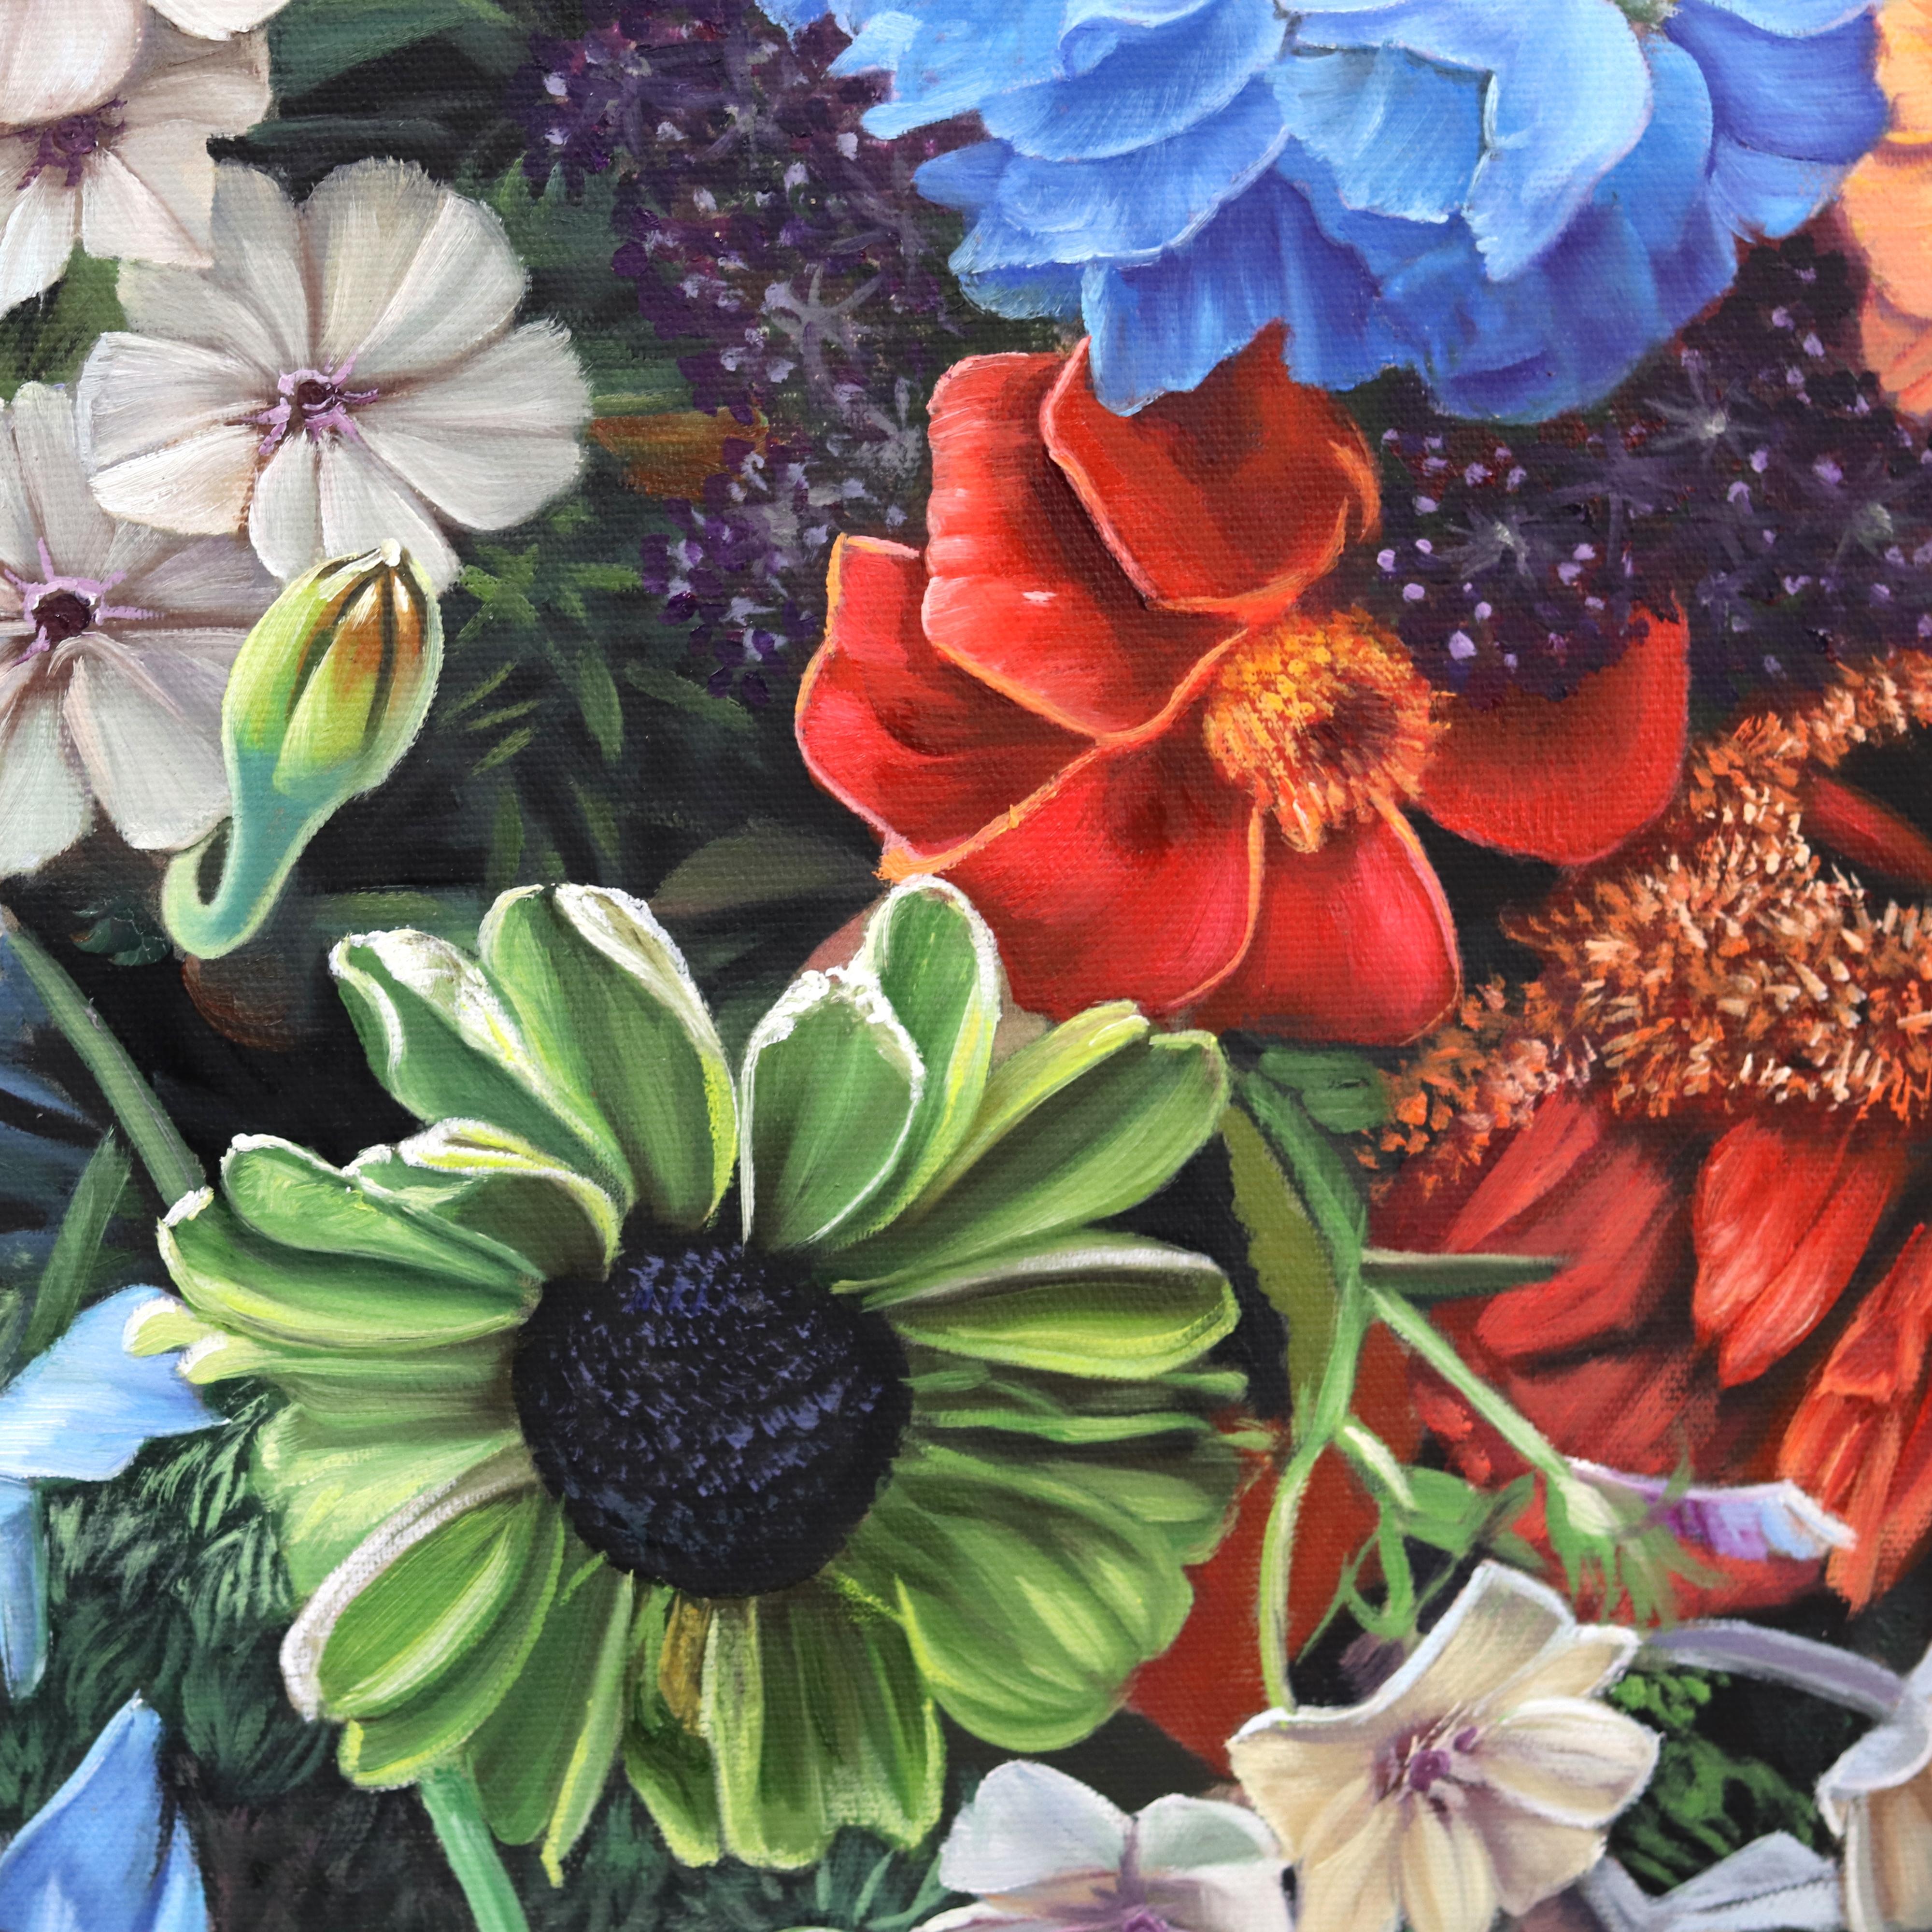 Touching Souls - Hyperrealist Floral Still Life Oil Painting 9